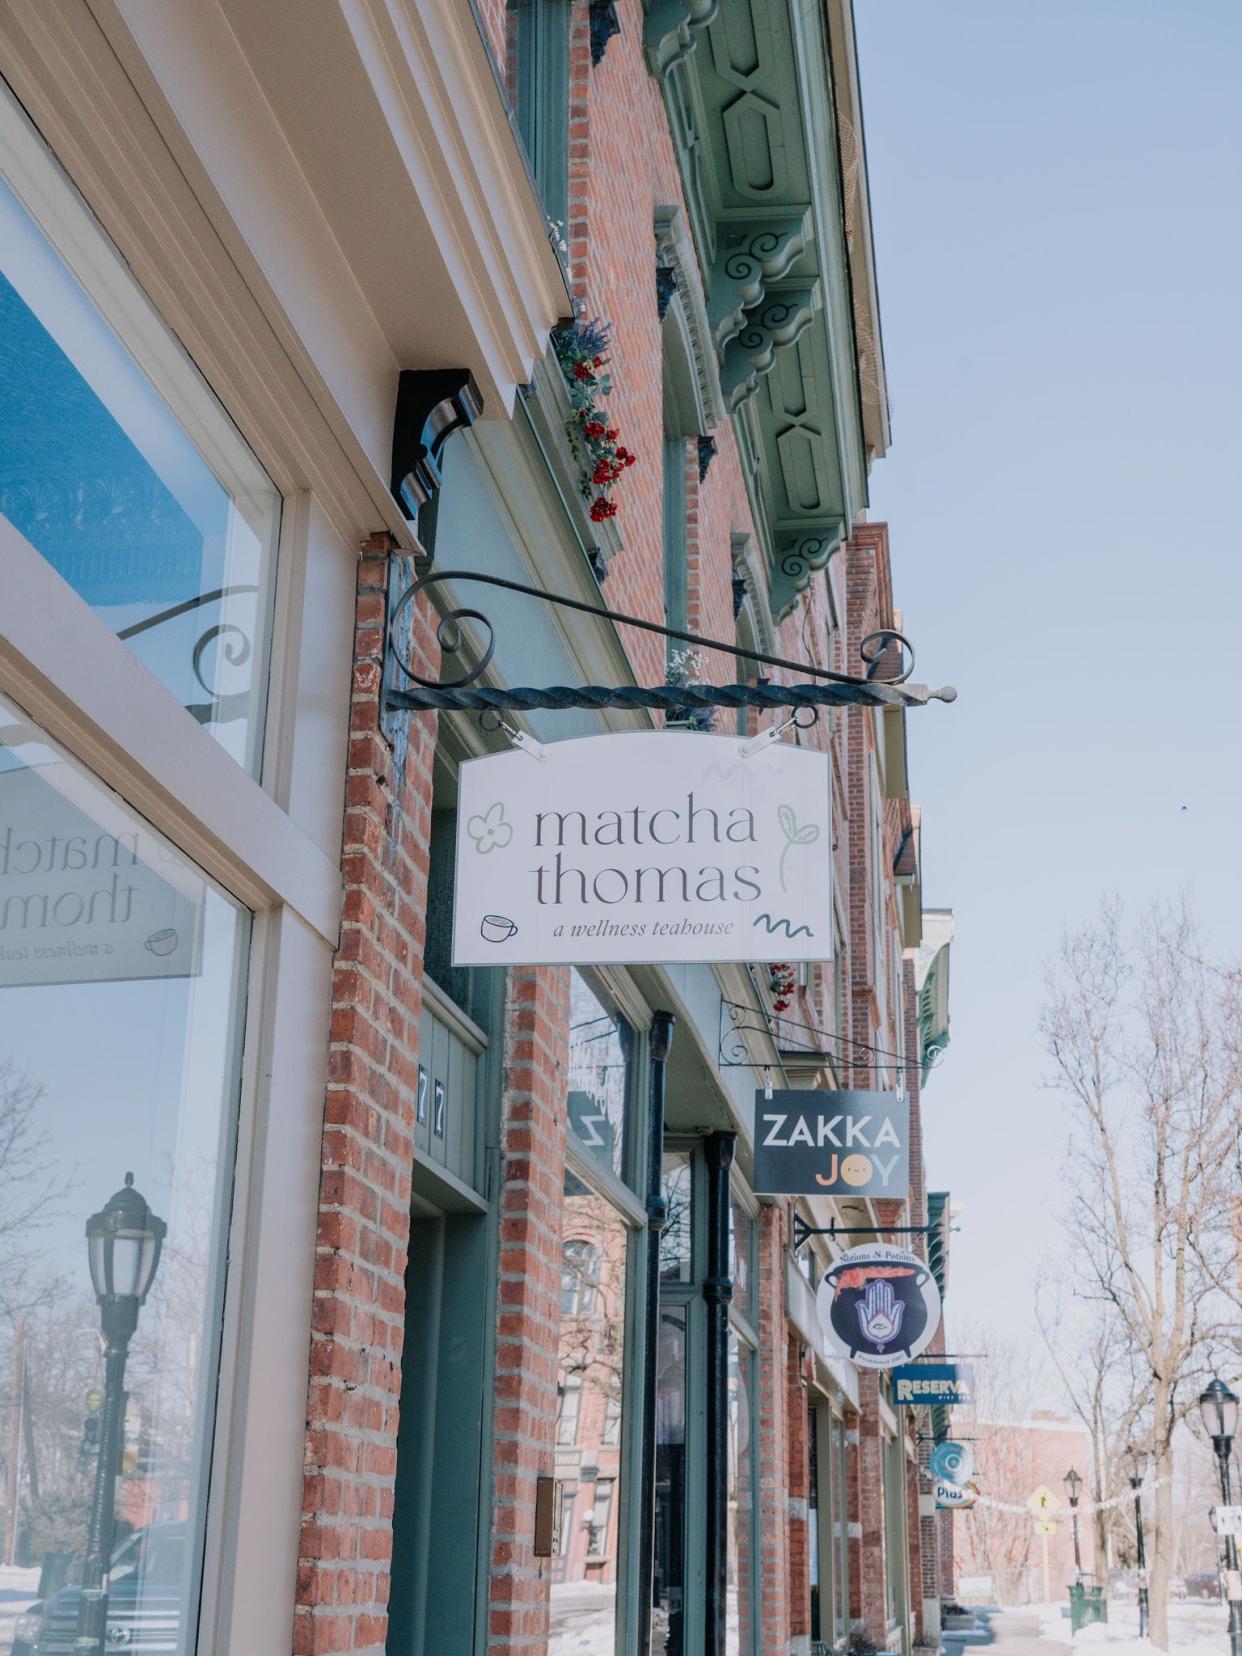 The outside of Matcha Thomas, a wellness teahouse, located at 179 Main St. in Beacon.